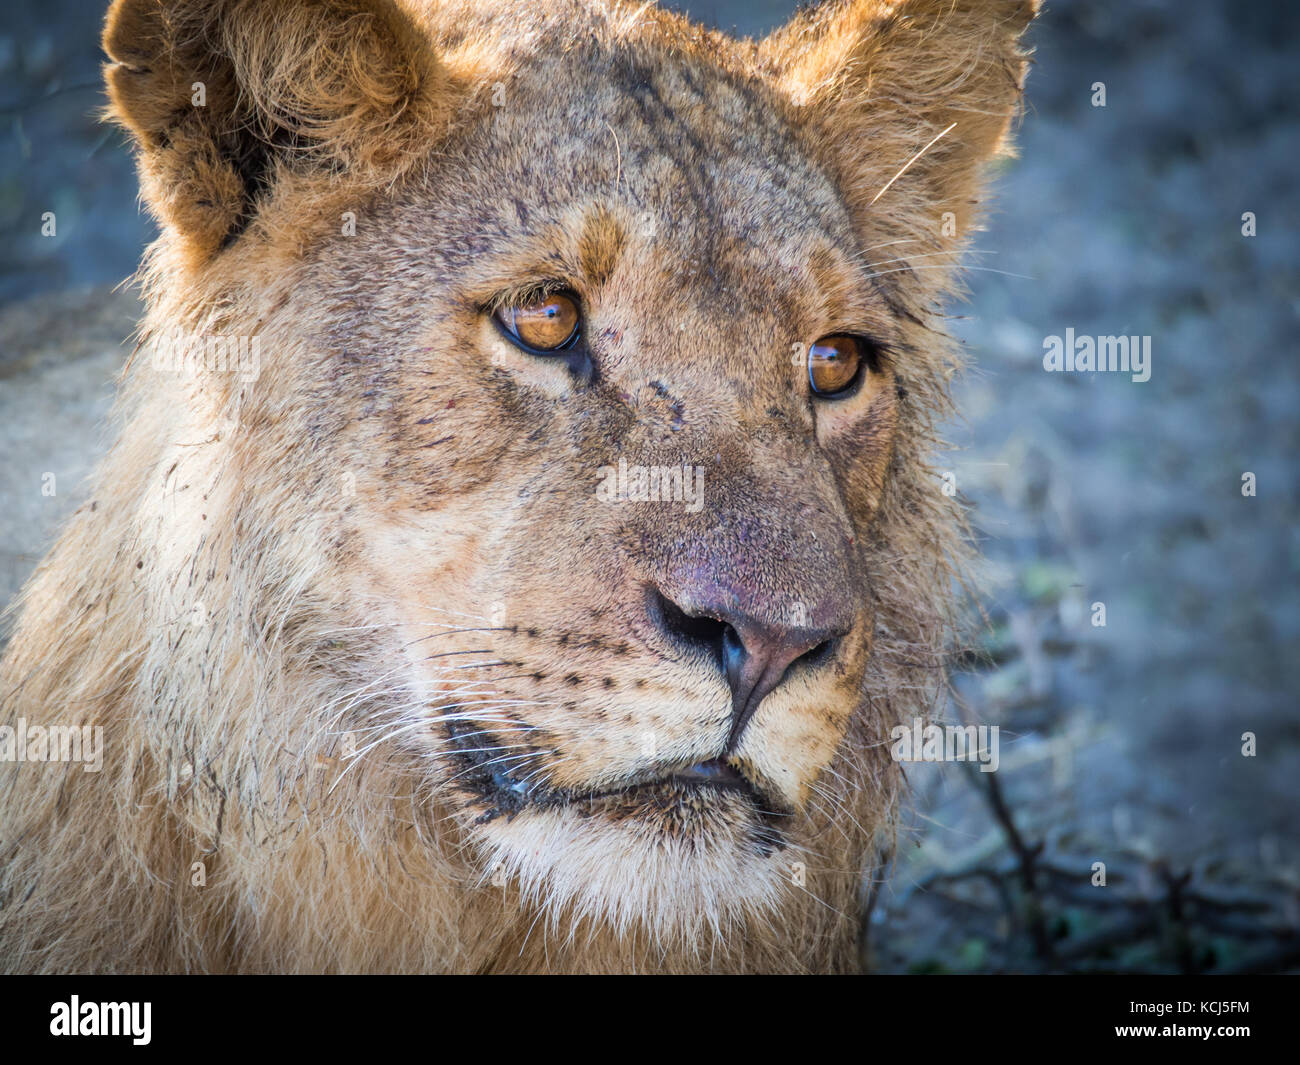 Closeup portrait of female lion laying at sandy beach of Chobe River after morning hunt, Chobe NP, Botswana, Africa Stock Photo